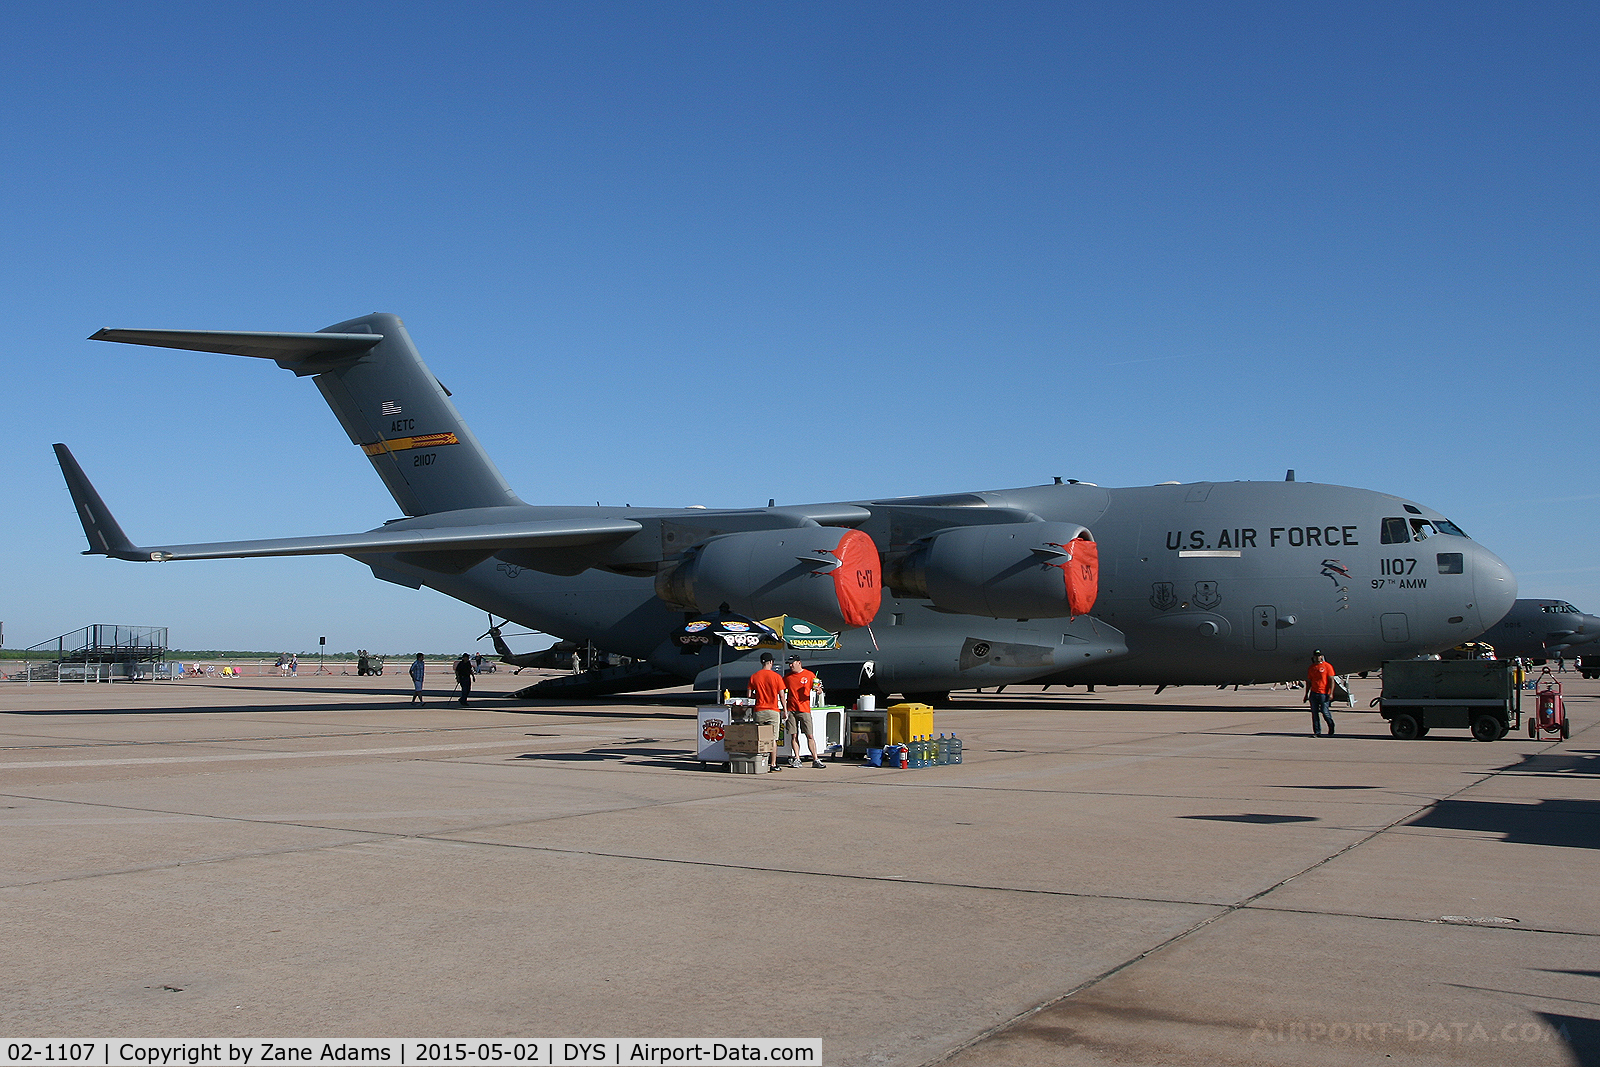 02-1107, 2002 Boeing C-17A Globemaster III C/N P-107, At the 2015 Big Country Airshow - Dyess AFB, Texas